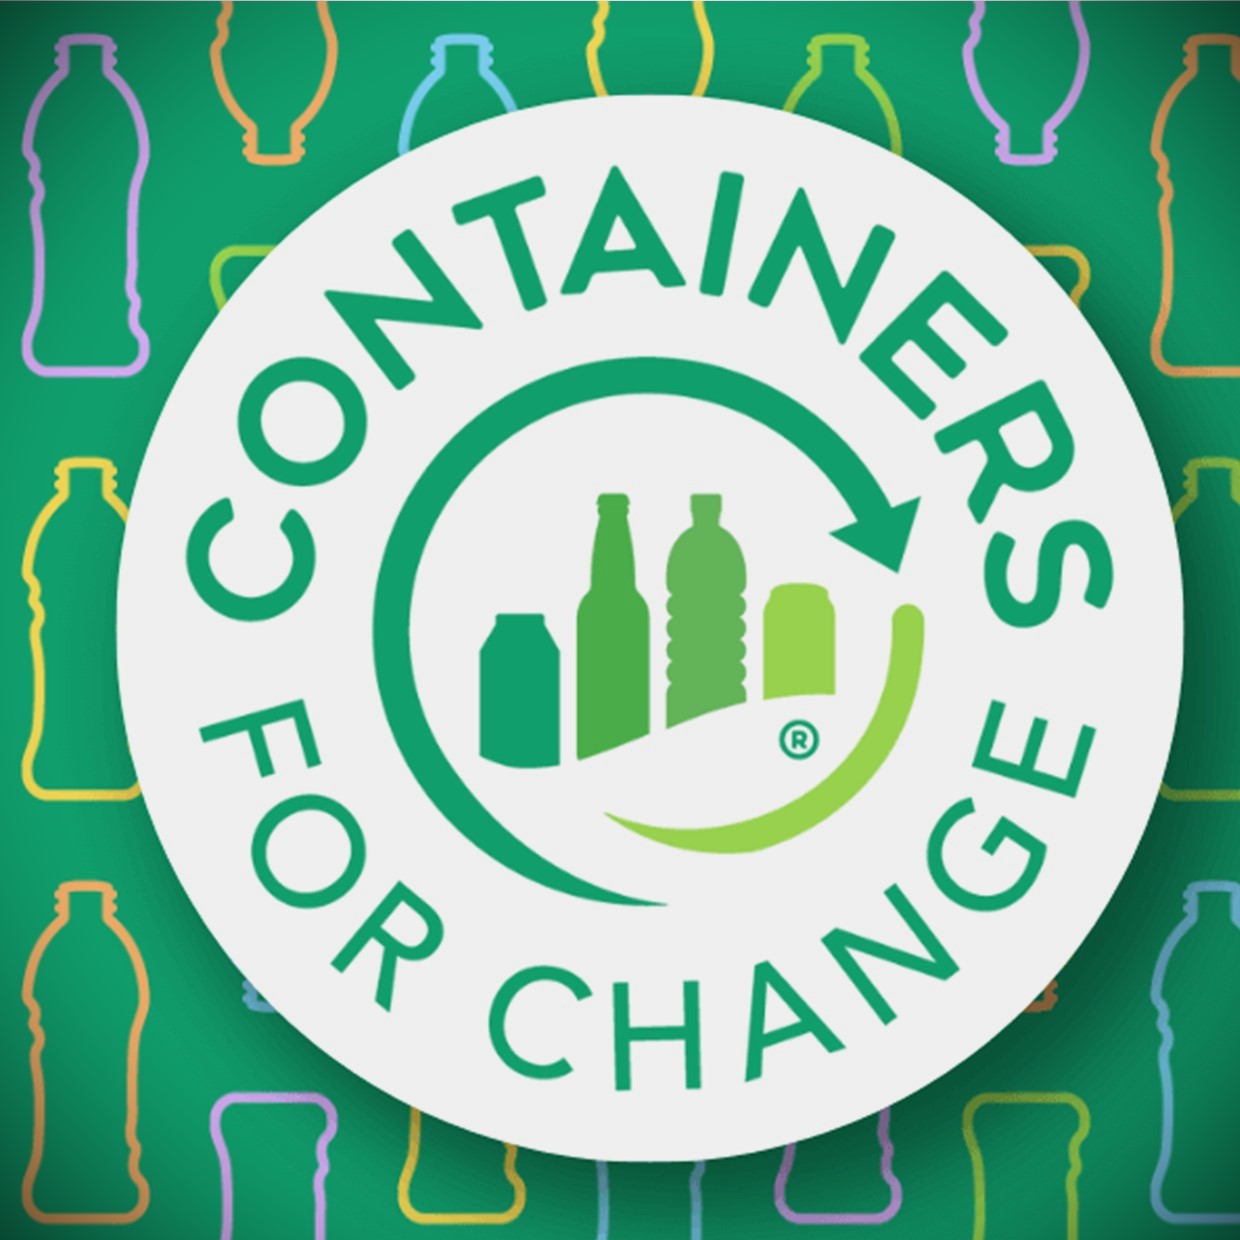 Containers for change logo